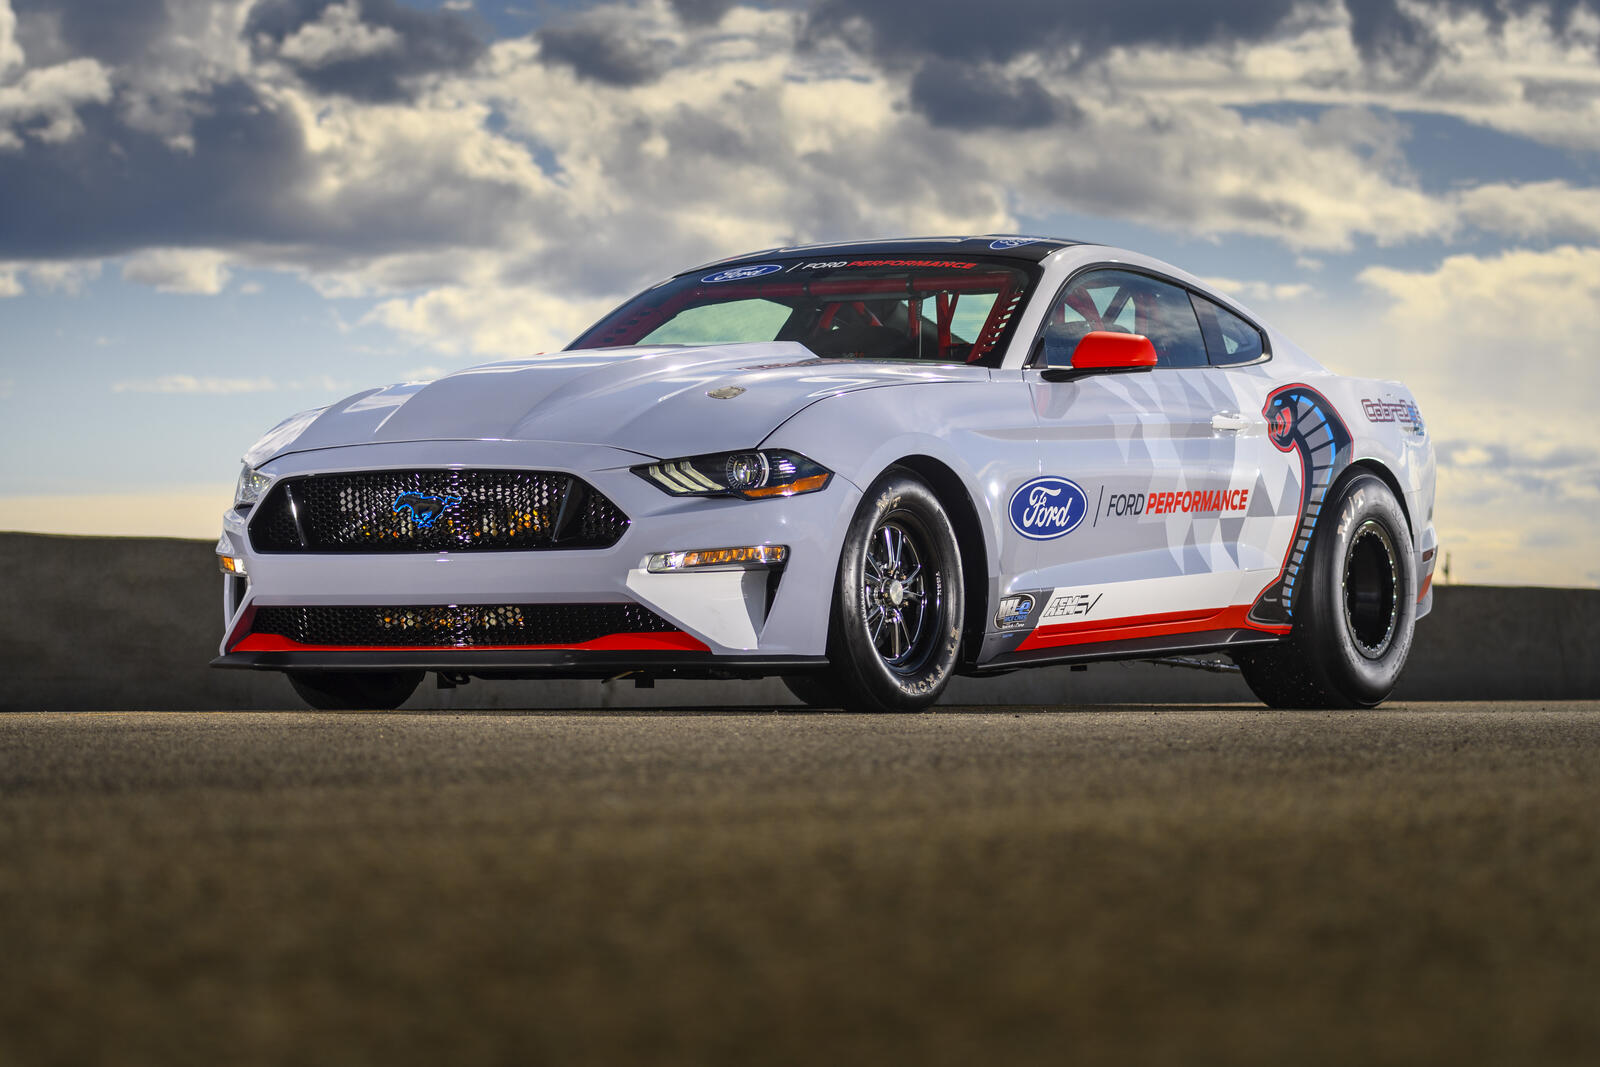 Wallpapers Ford Mustang gray cars on the desktop